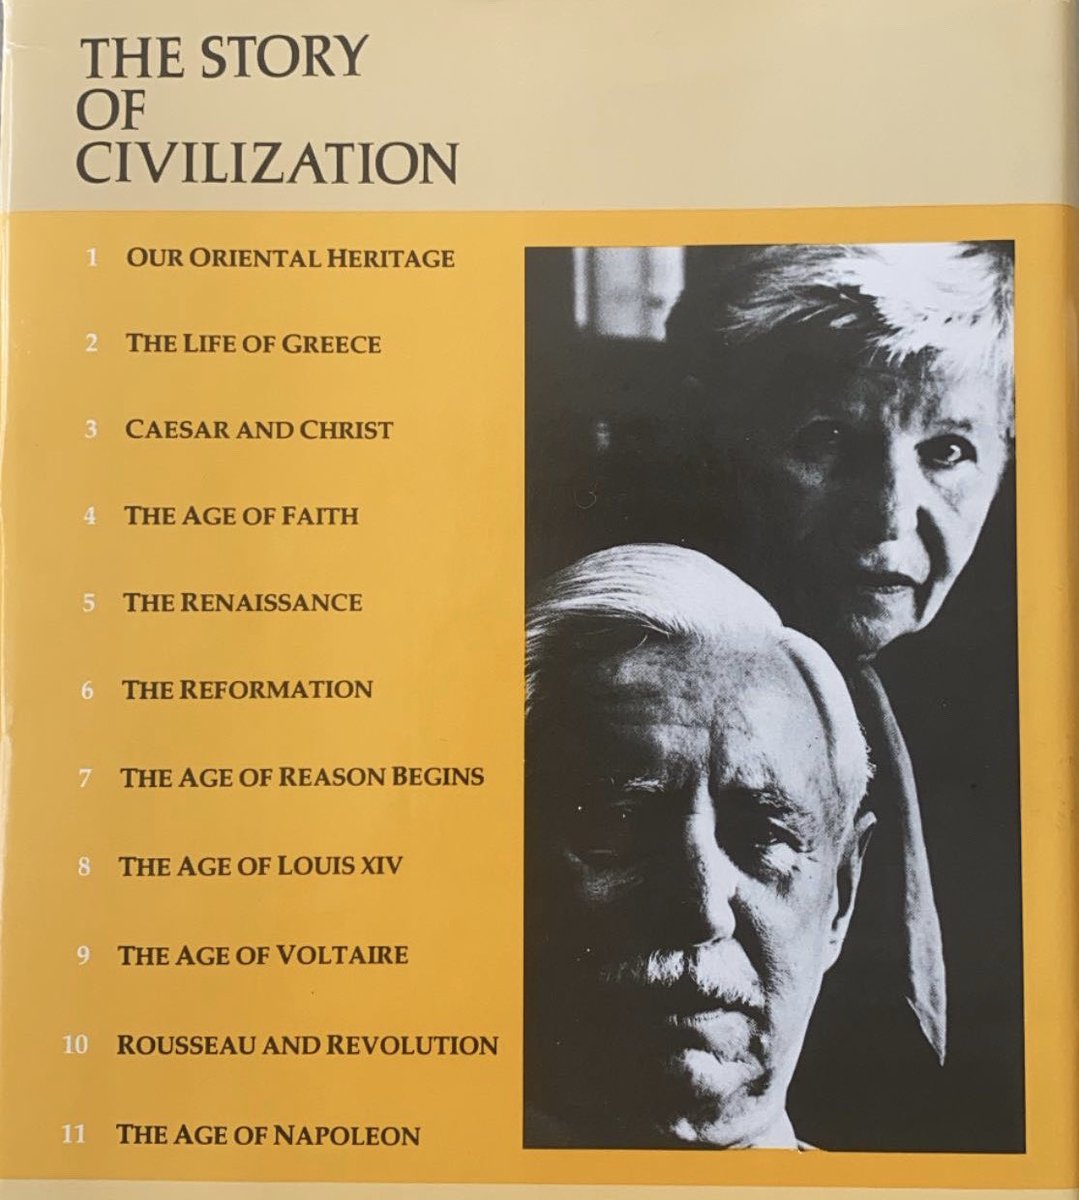 My notes on The Story of Civilization, Volume 1, Chapter 2: The Economic Elements of Civilization by Will & Ariel Durant.